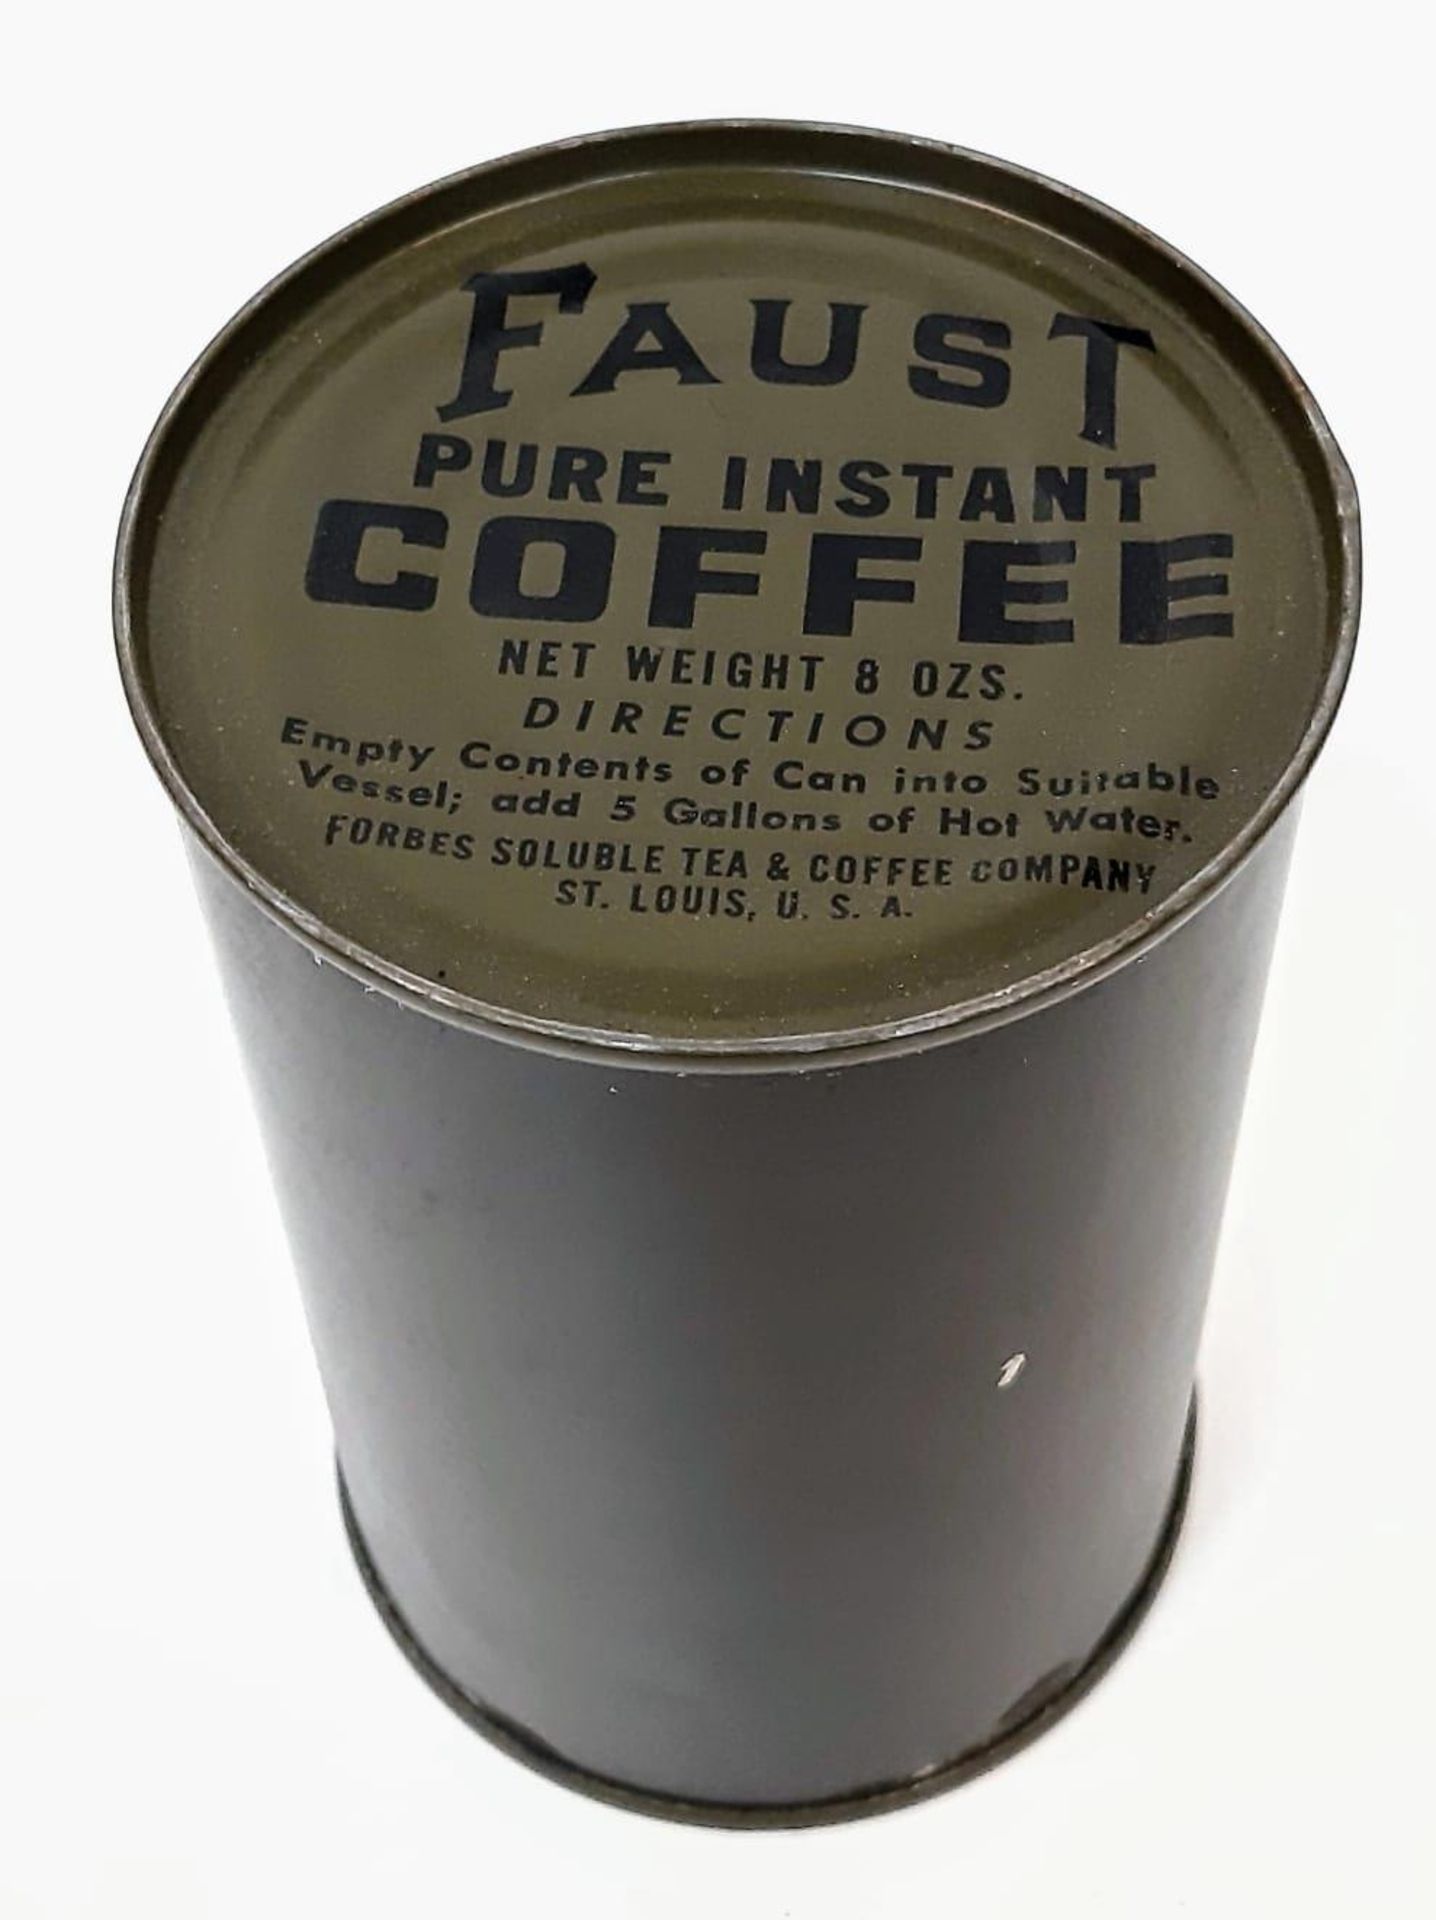 WW1 US Tin of Faust Coffee Dated 1944. From a crate of coffee found in Normandy France.